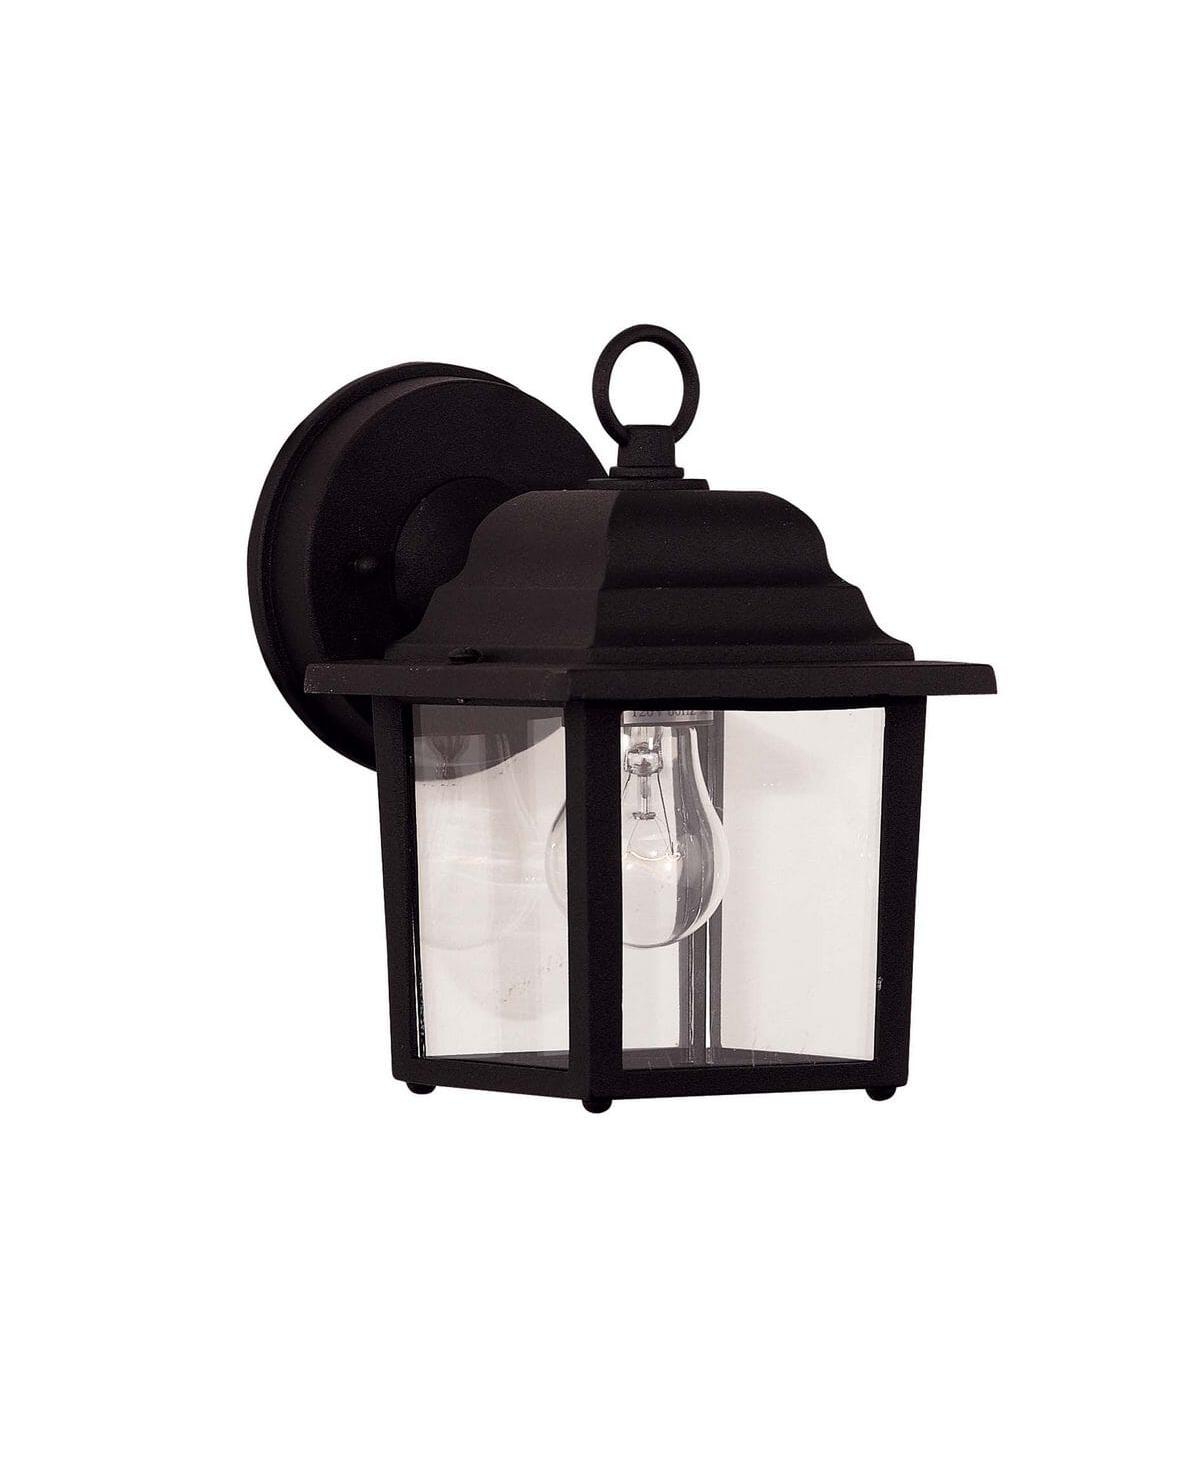 Exterior Collections 9" Wall Lantern - Rustic bronze